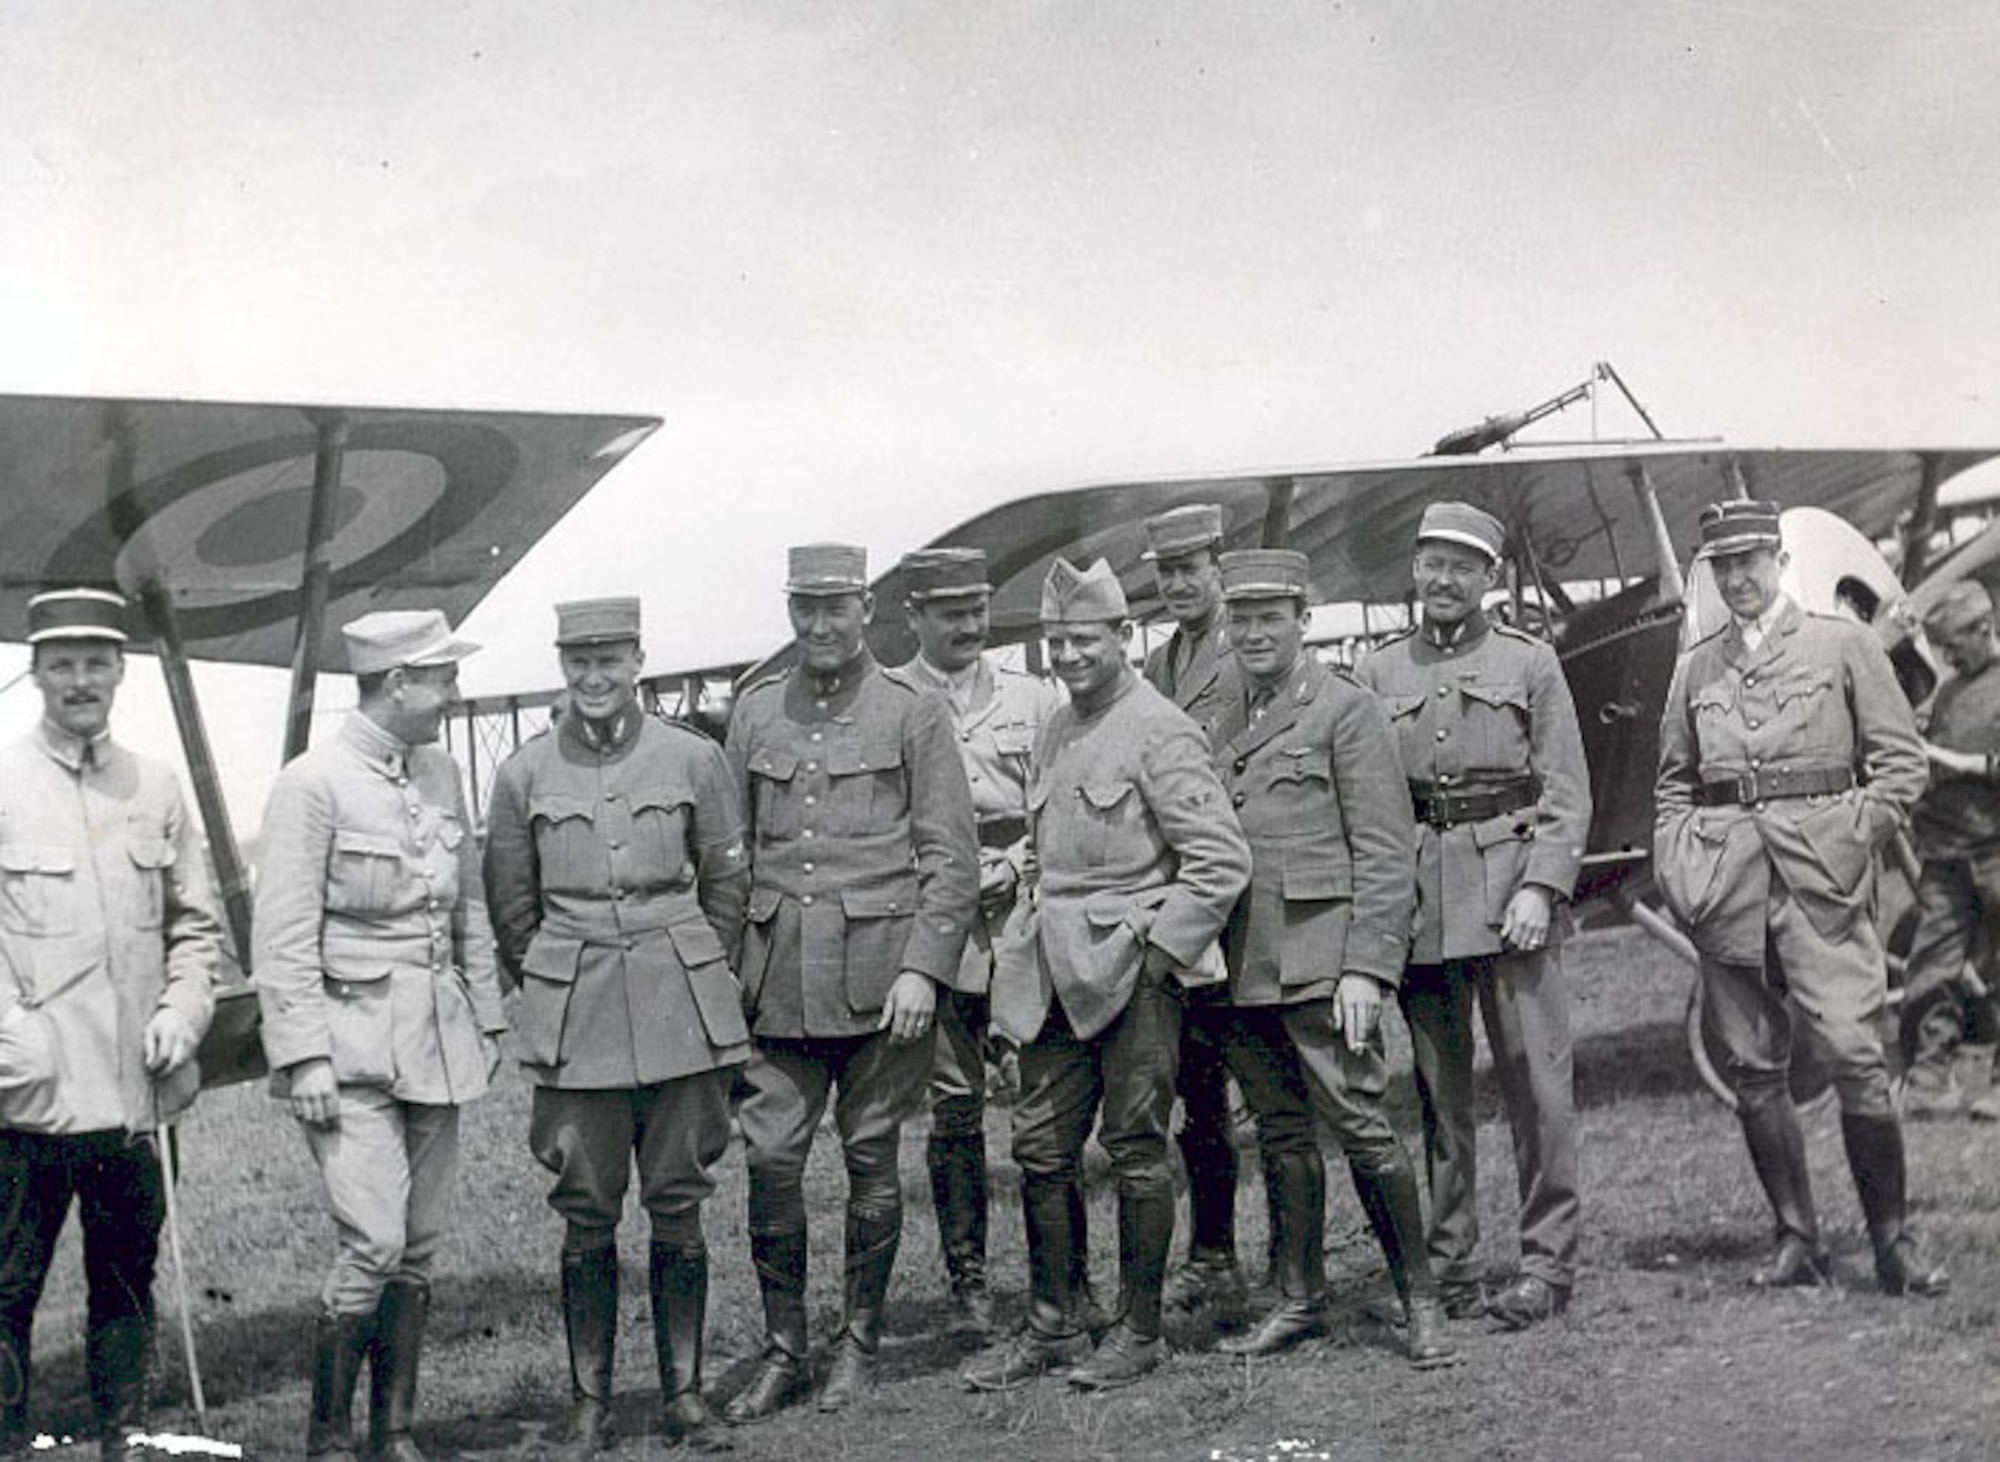 Escadrille Lafayette in July 1916, was established as a squadron of mostly American volunteer pilots flying and fighting for the French Air Service during World War I. (Courtesy photo)